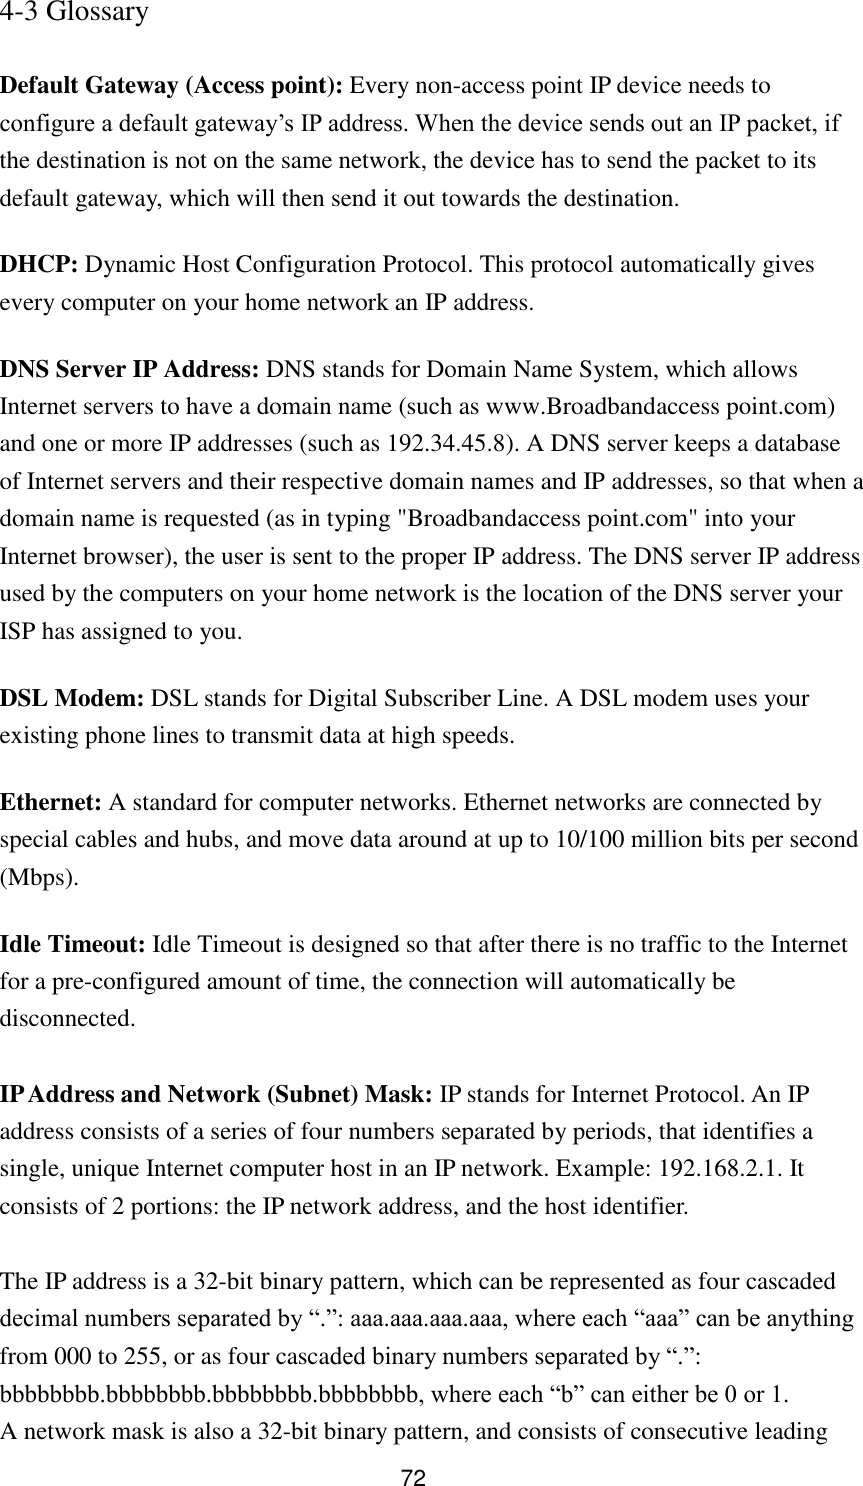 72 4-3 Glossary  Default Gateway (Access point): Every non-access point IP device needs to configure a default gateway‟s IP address. When the device sends out an IP packet, if the destination is not on the same network, the device has to send the packet to its default gateway, which will then send it out towards the destination. DHCP: Dynamic Host Configuration Protocol. This protocol automatically gives every computer on your home network an IP address. DNS Server IP Address: DNS stands for Domain Name System, which allows Internet servers to have a domain name (such as www.Broadbandaccess point.com) and one or more IP addresses (such as 192.34.45.8). A DNS server keeps a database of Internet servers and their respective domain names and IP addresses, so that when a domain name is requested (as in typing &quot;Broadbandaccess point.com&quot; into your Internet browser), the user is sent to the proper IP address. The DNS server IP address used by the computers on your home network is the location of the DNS server your ISP has assigned to you.   DSL Modem: DSL stands for Digital Subscriber Line. A DSL modem uses your existing phone lines to transmit data at high speeds.   Ethernet: A standard for computer networks. Ethernet networks are connected by special cables and hubs, and move data around at up to 10/100 million bits per second (Mbps).   Idle Timeout: Idle Timeout is designed so that after there is no traffic to the Internet for a pre-configured amount of time, the connection will automatically be disconnected.  IP Address and Network (Subnet) Mask: IP stands for Internet Protocol. An IP address consists of a series of four numbers separated by periods, that identifies a single, unique Internet computer host in an IP network. Example: 192.168.2.1. It consists of 2 portions: the IP network address, and the host identifier.  The IP address is a 32-bit binary pattern, which can be represented as four cascaded decimal numbers separated by “.”: aaa.aaa.aaa.aaa, where each “aaa” can be anything from 000 to 255, or as four cascaded binary numbers separated by “.”: bbbbbbbb.bbbbbbbb.bbbbbbbb.bbbbbbbb, where each “b” can either be 0 or 1. A network mask is also a 32-bit binary pattern, and consists of consecutive leading 